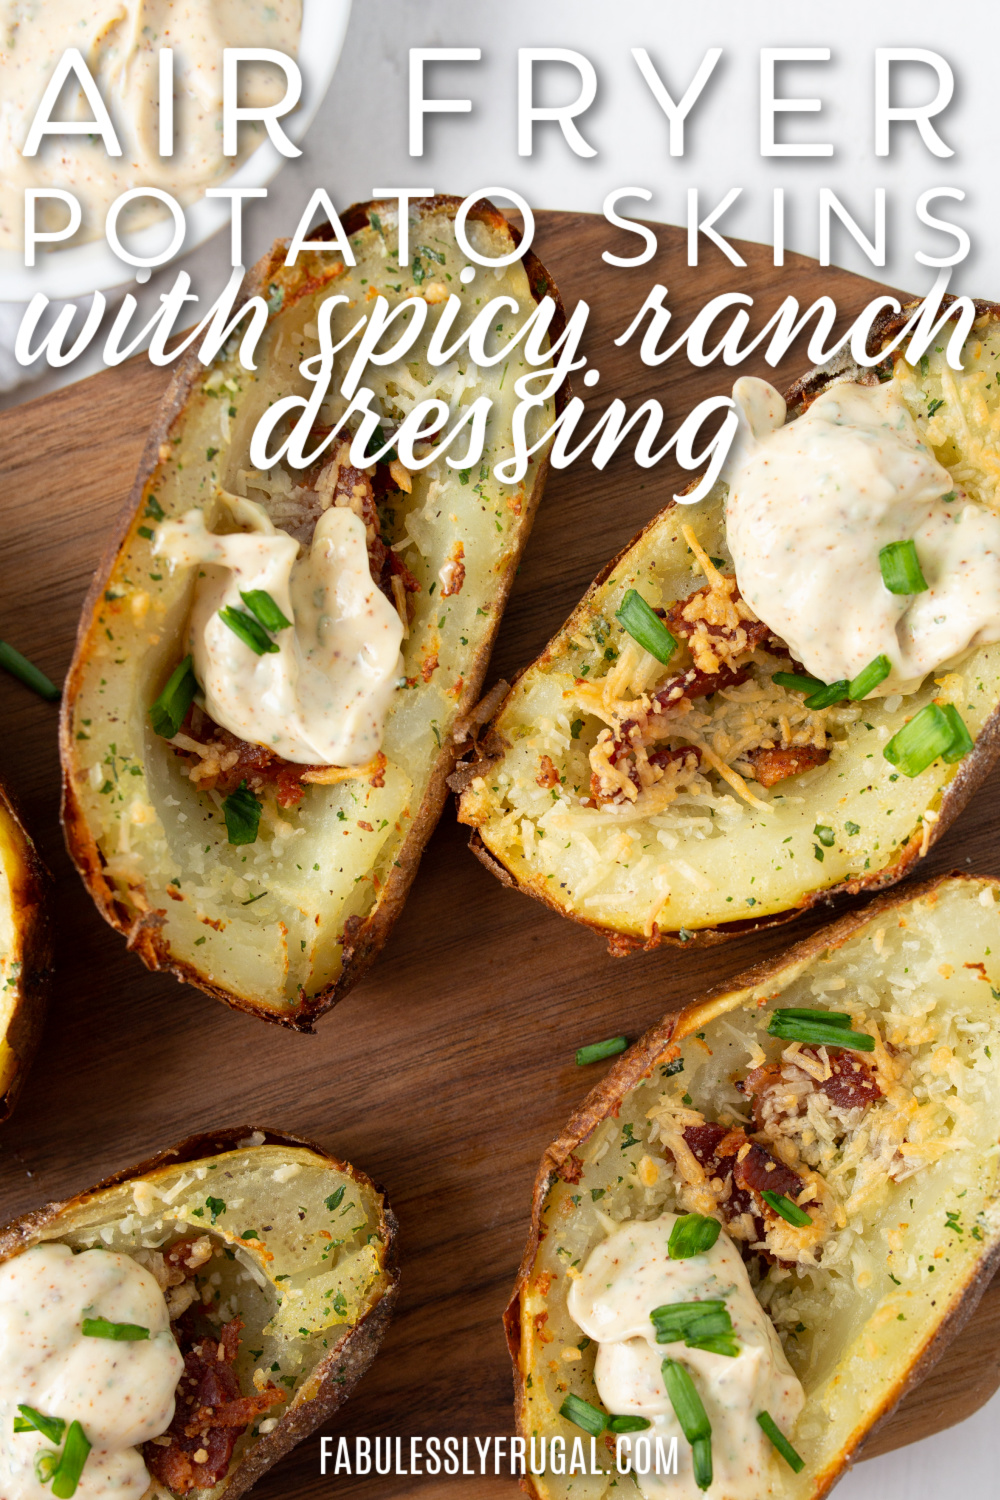 how to make potato skins with spicy ranch dressing